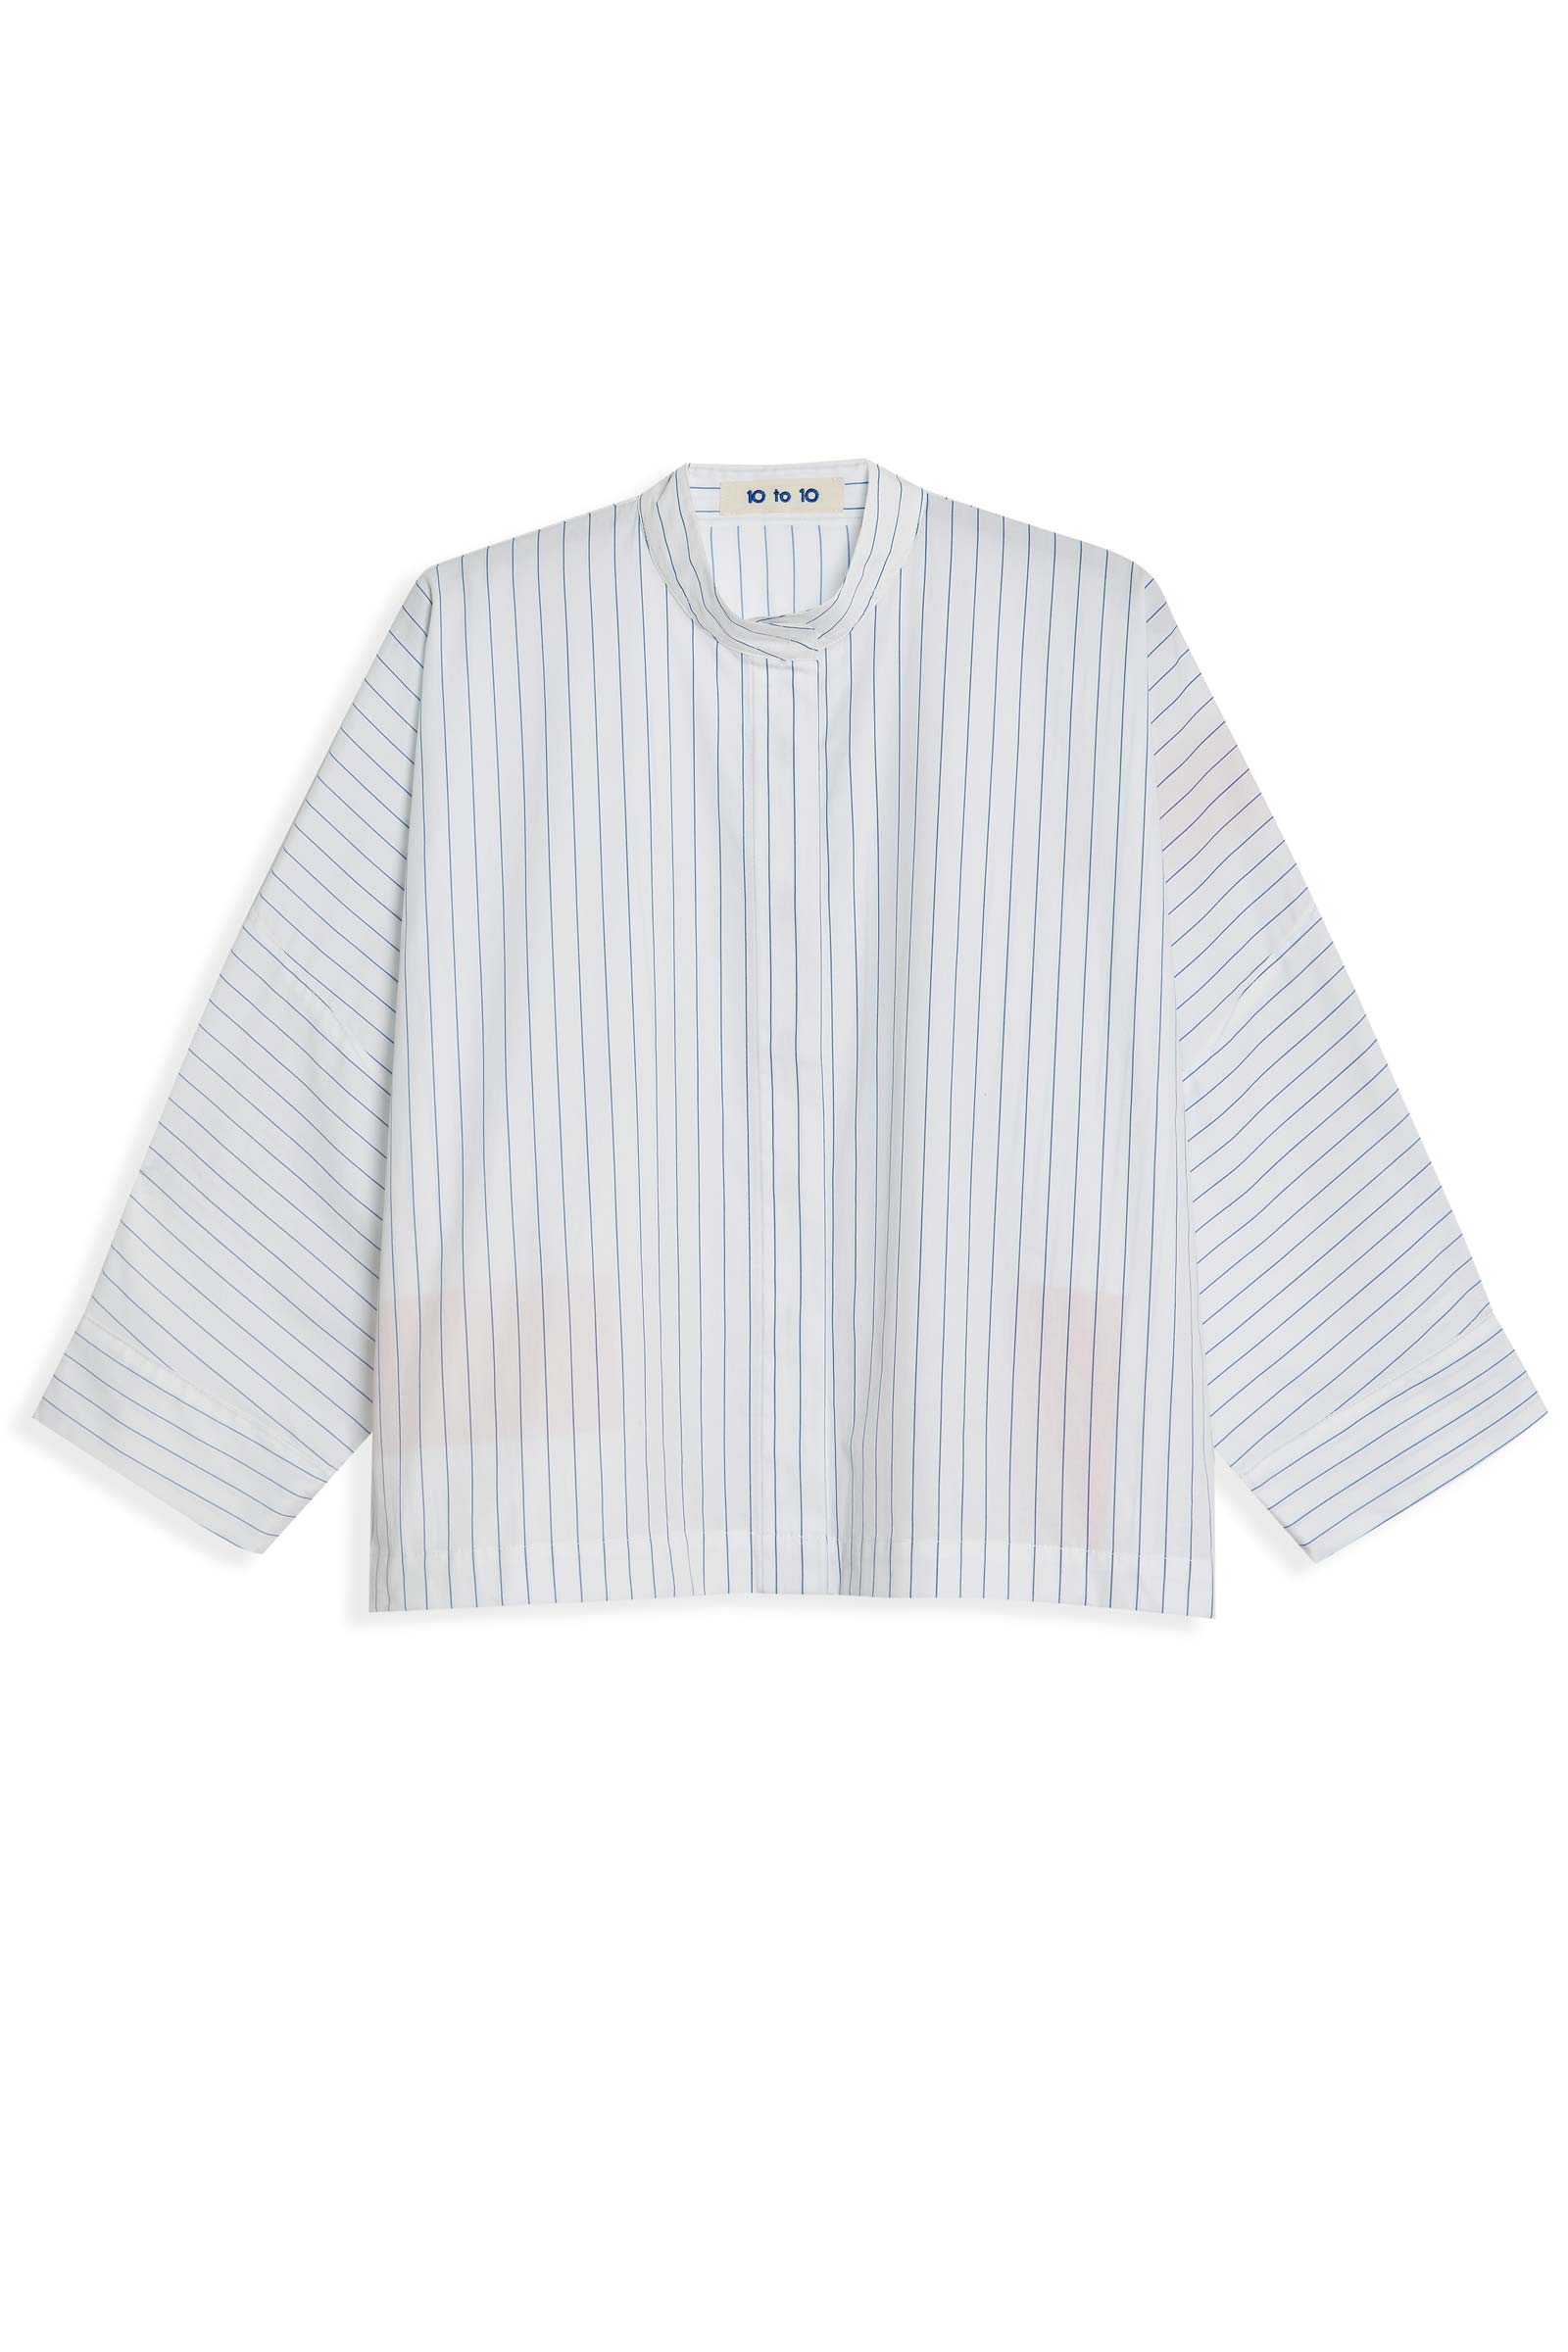 10 to 10 striped shirt product image